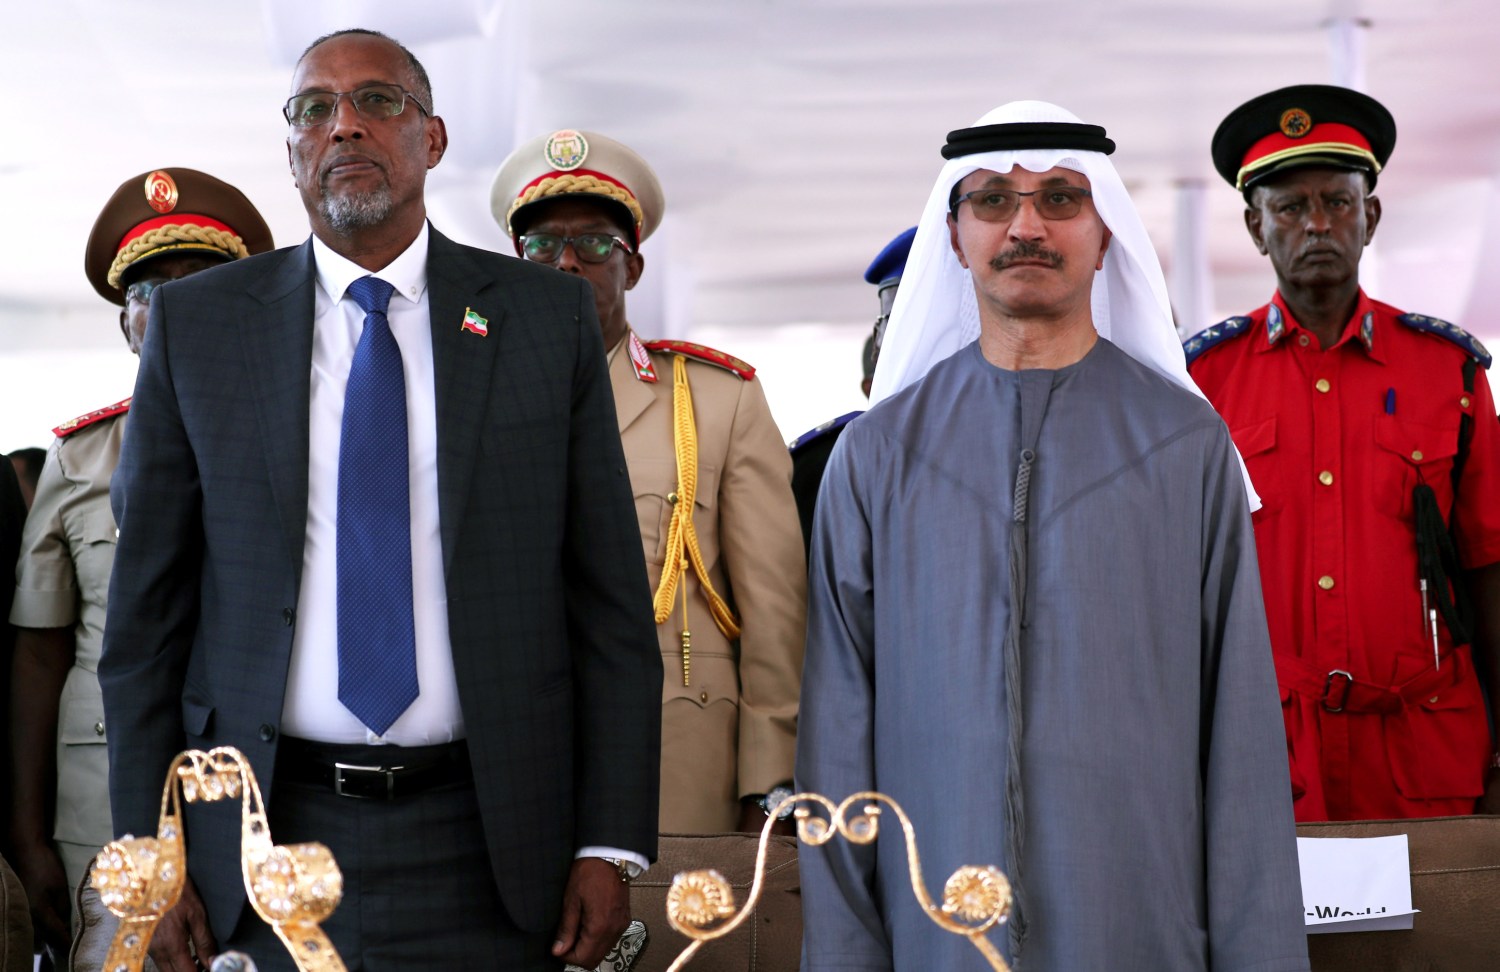 Muse Bihi Abdi, of Somaliland and Sultan Ahmed bin Sulayem, Chairman and Chief Executive Officer of DP World, attend the signing ceremony of expansion project of Berbera port in Hargeysa, in northern Somalia's semi-autonomous Somaliland region, October 11, 2018. Picture taken October 11, 2018. REUTERS/Tiksa Negeri - RC1DA84468C0